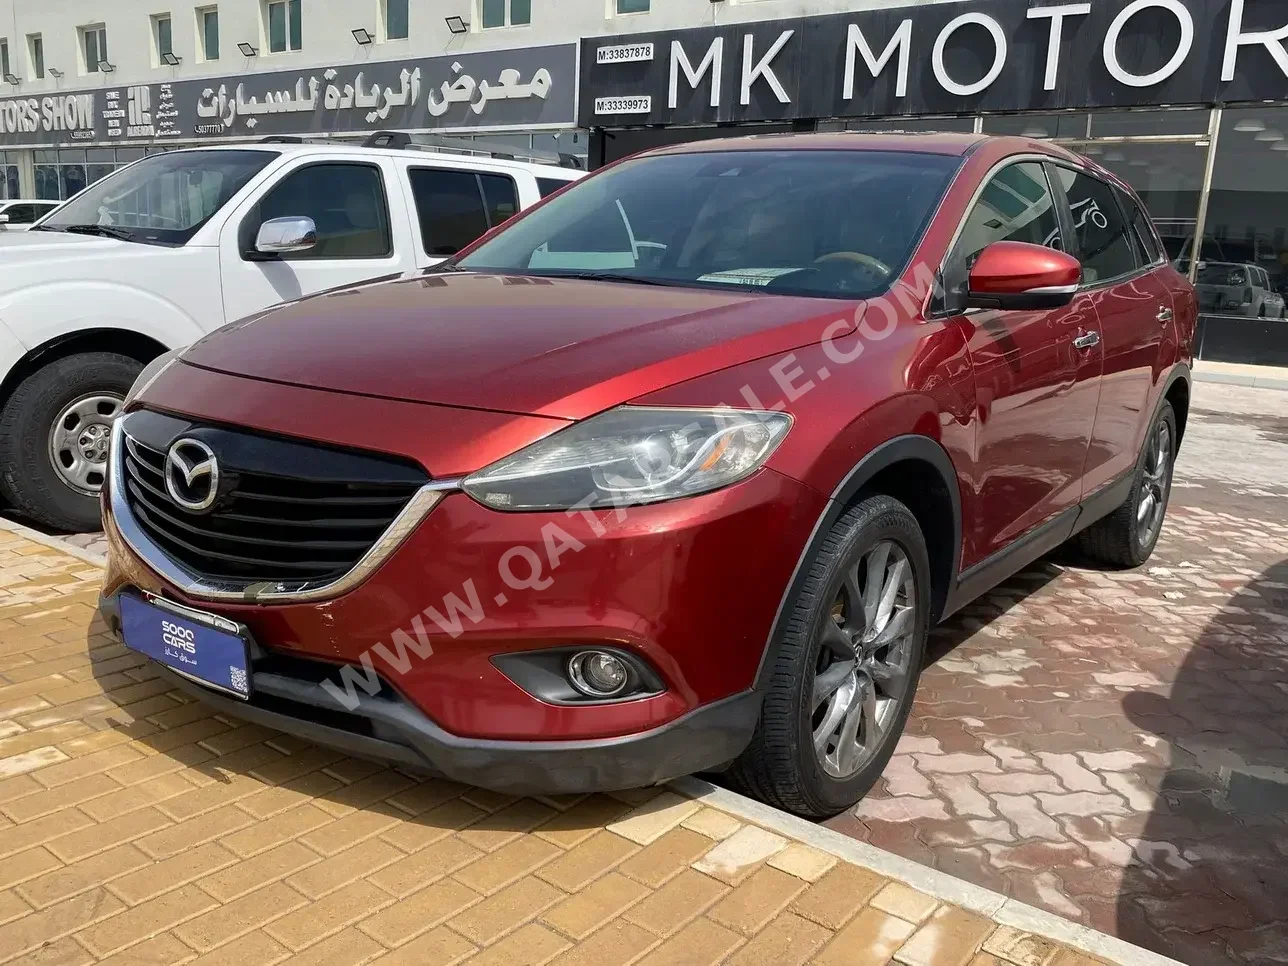 Mazda  CX  9  2014  Automatic  183,000 Km  6 Cylinder  Four Wheel Drive (4WD)  SUV  Red